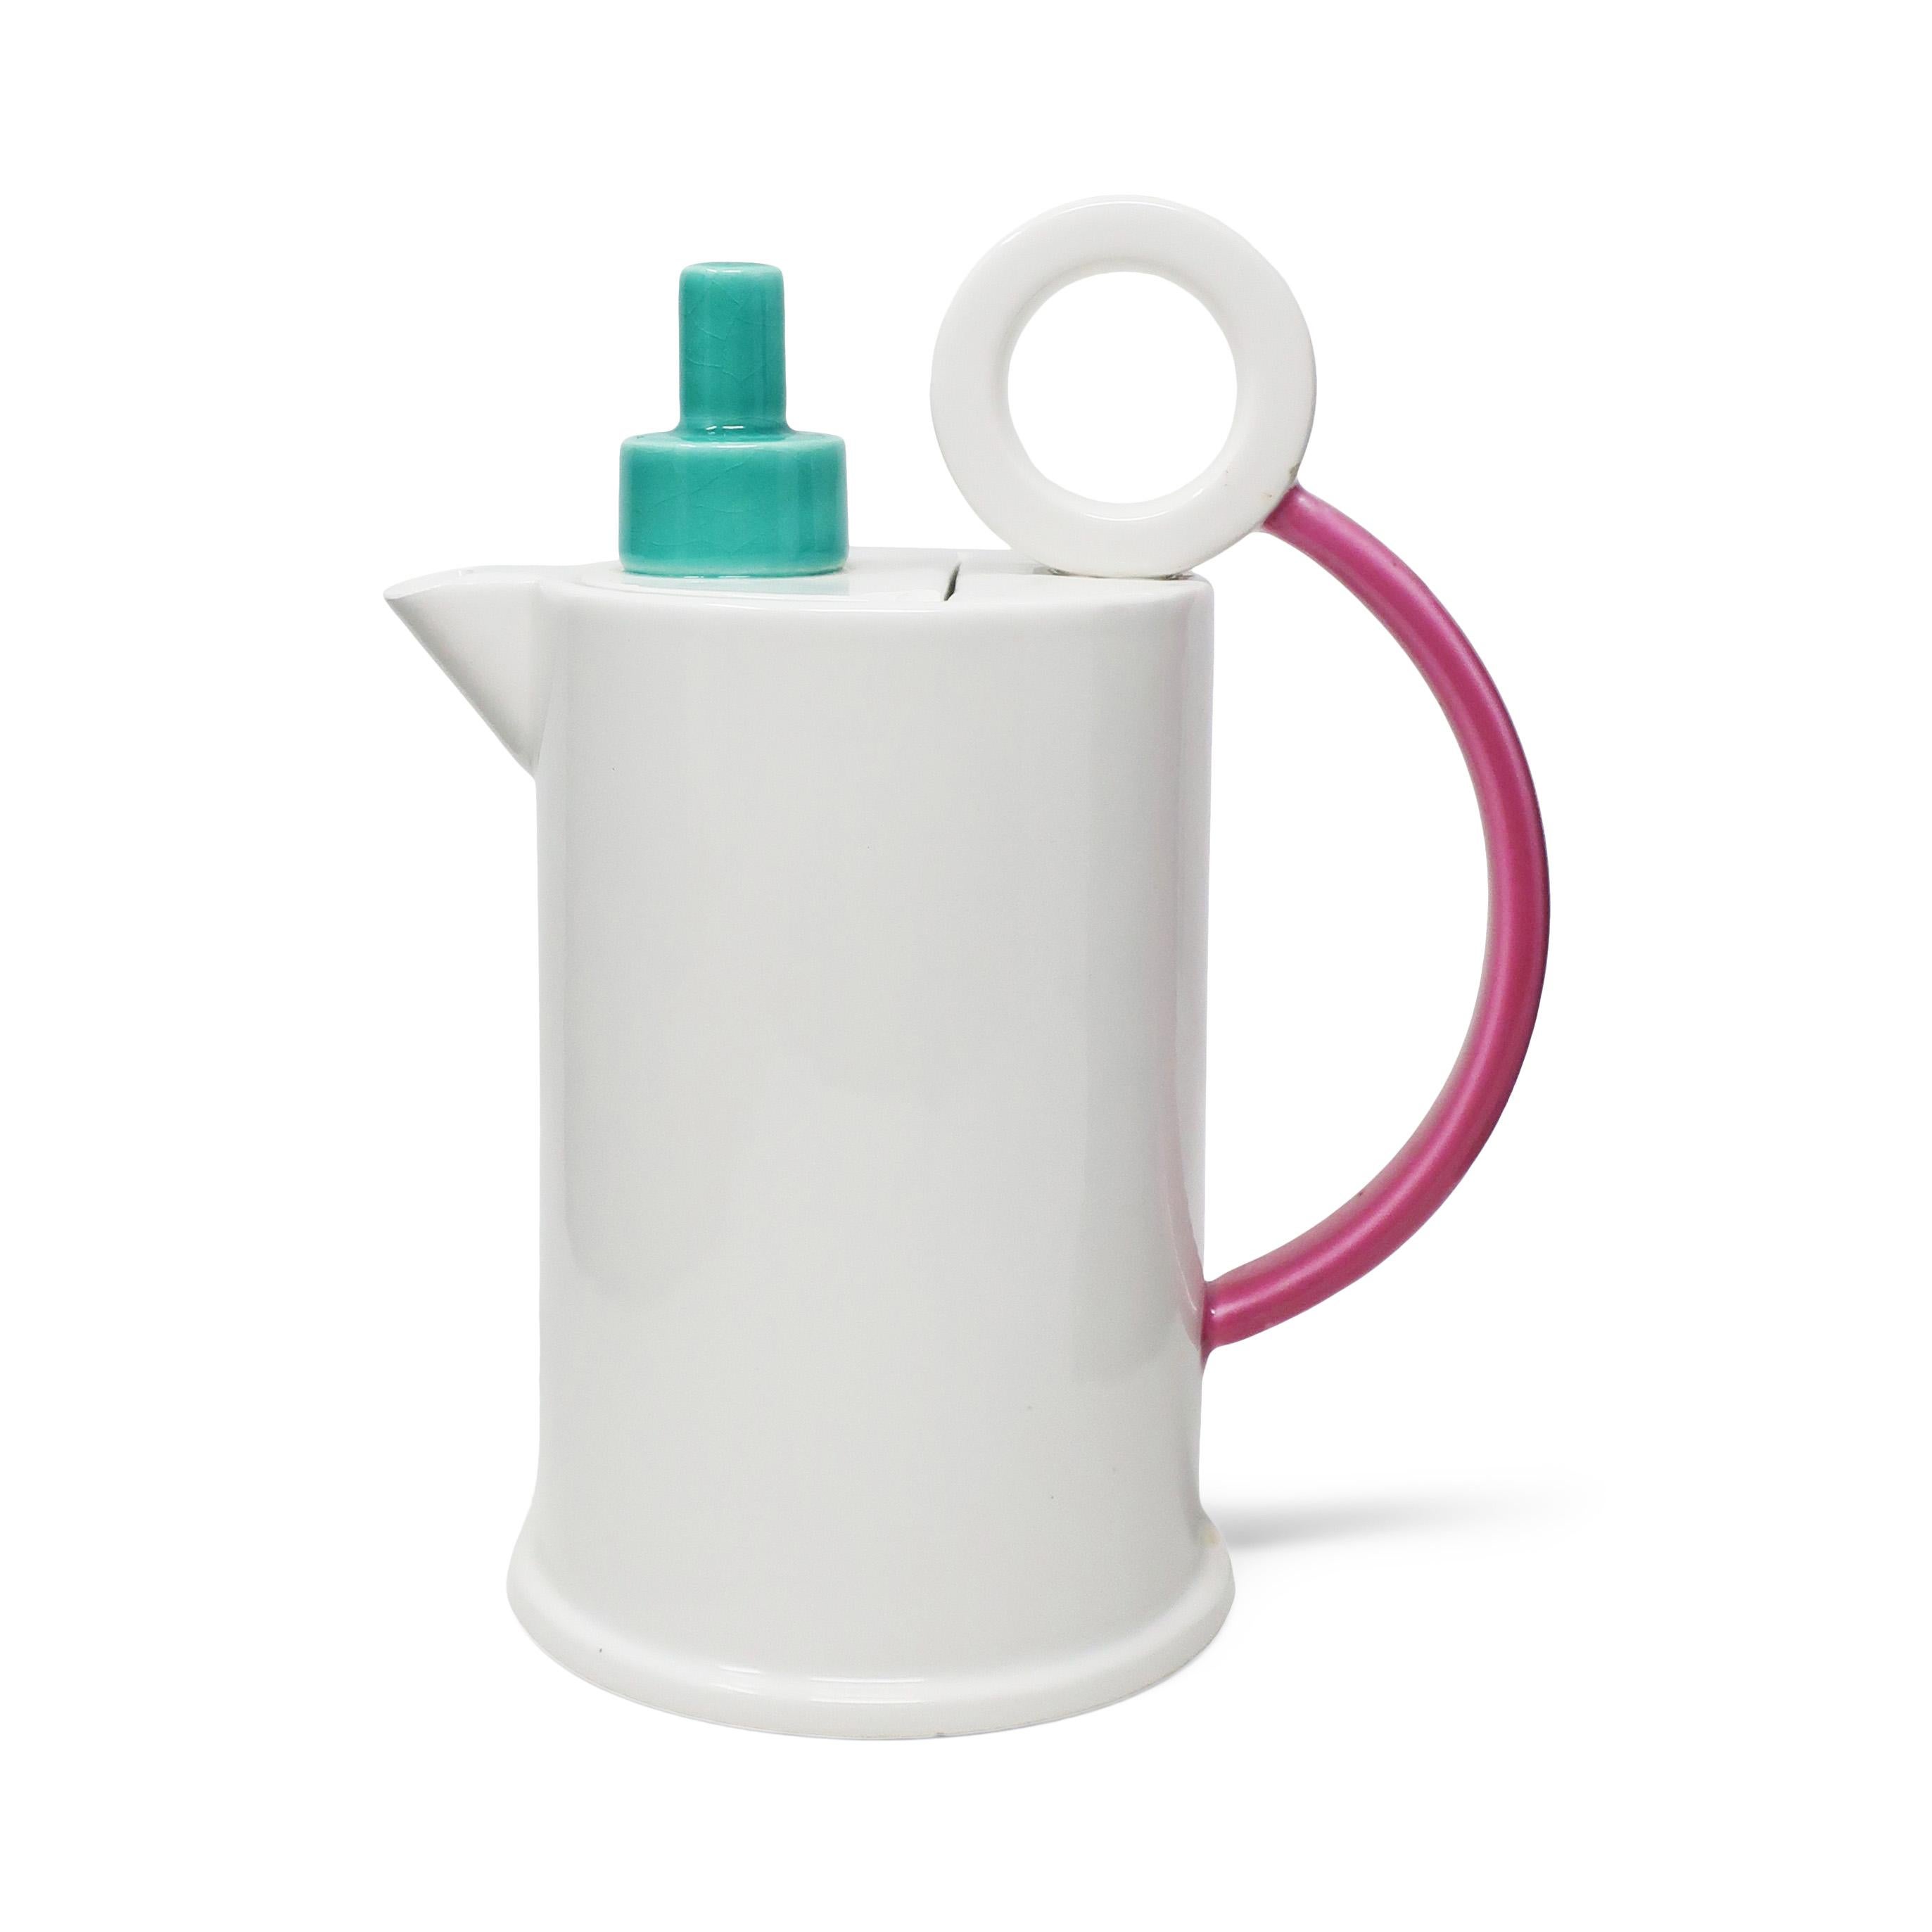 Stunning postmodern ceramic tea or coffee pot from the Hollywood collection designed by Marco Zanini for Flavia Montelupo/Bitossi. White body, rounded pink handle, and stacked teal top show a clear influence from the Memphis group designers, of